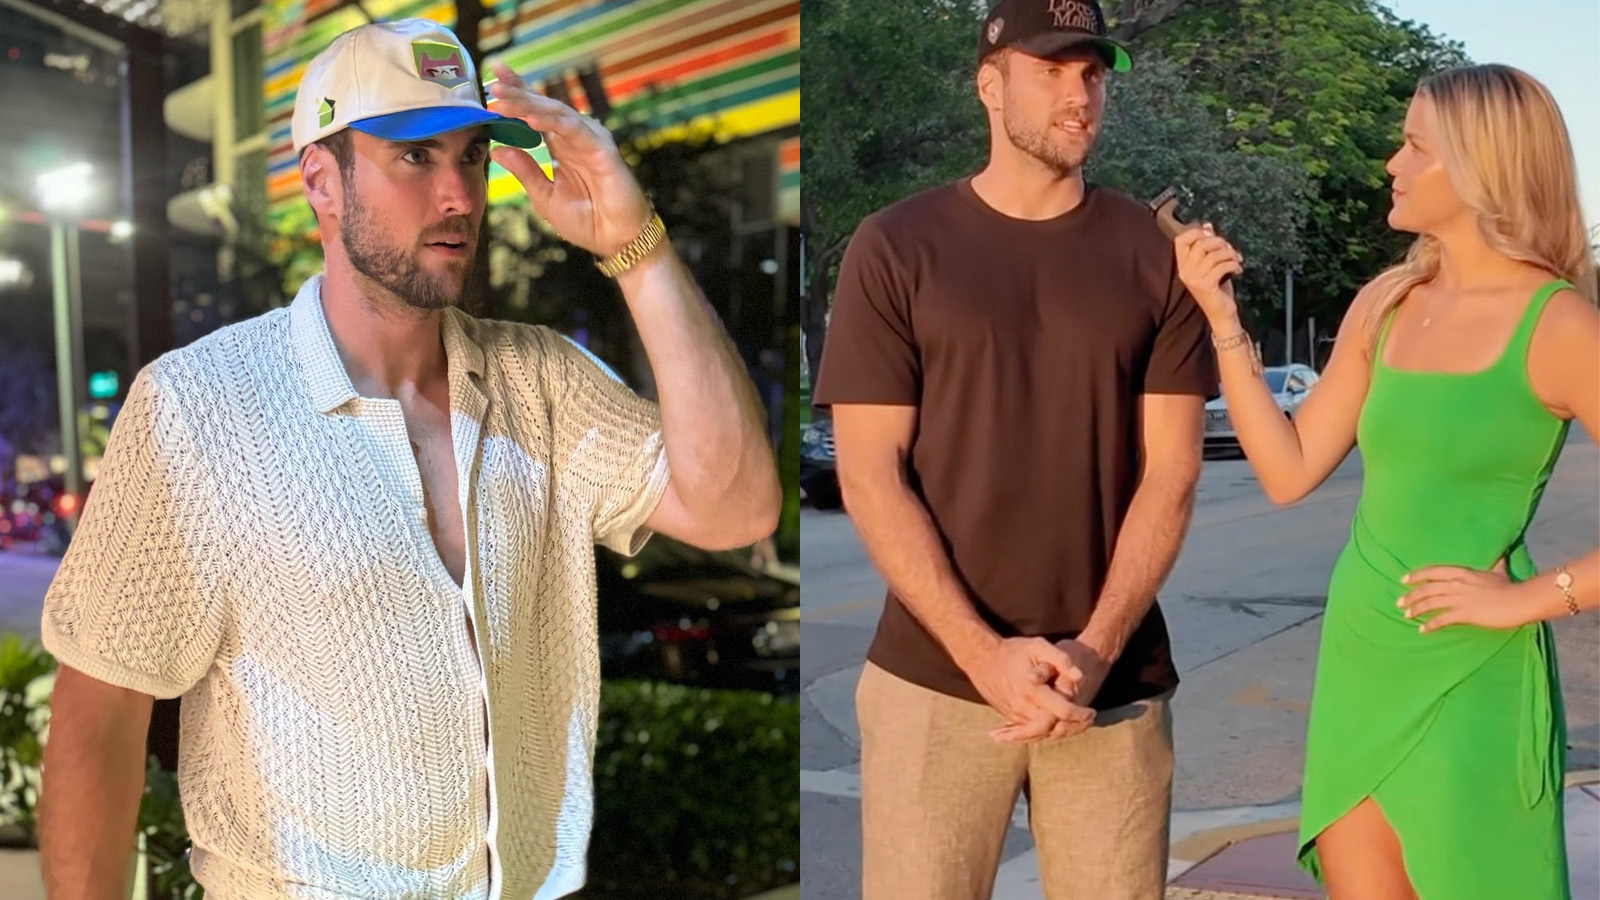 Who is Tyler Bergantino on TikTok? 6’9″ man goes viral after interview leads to date